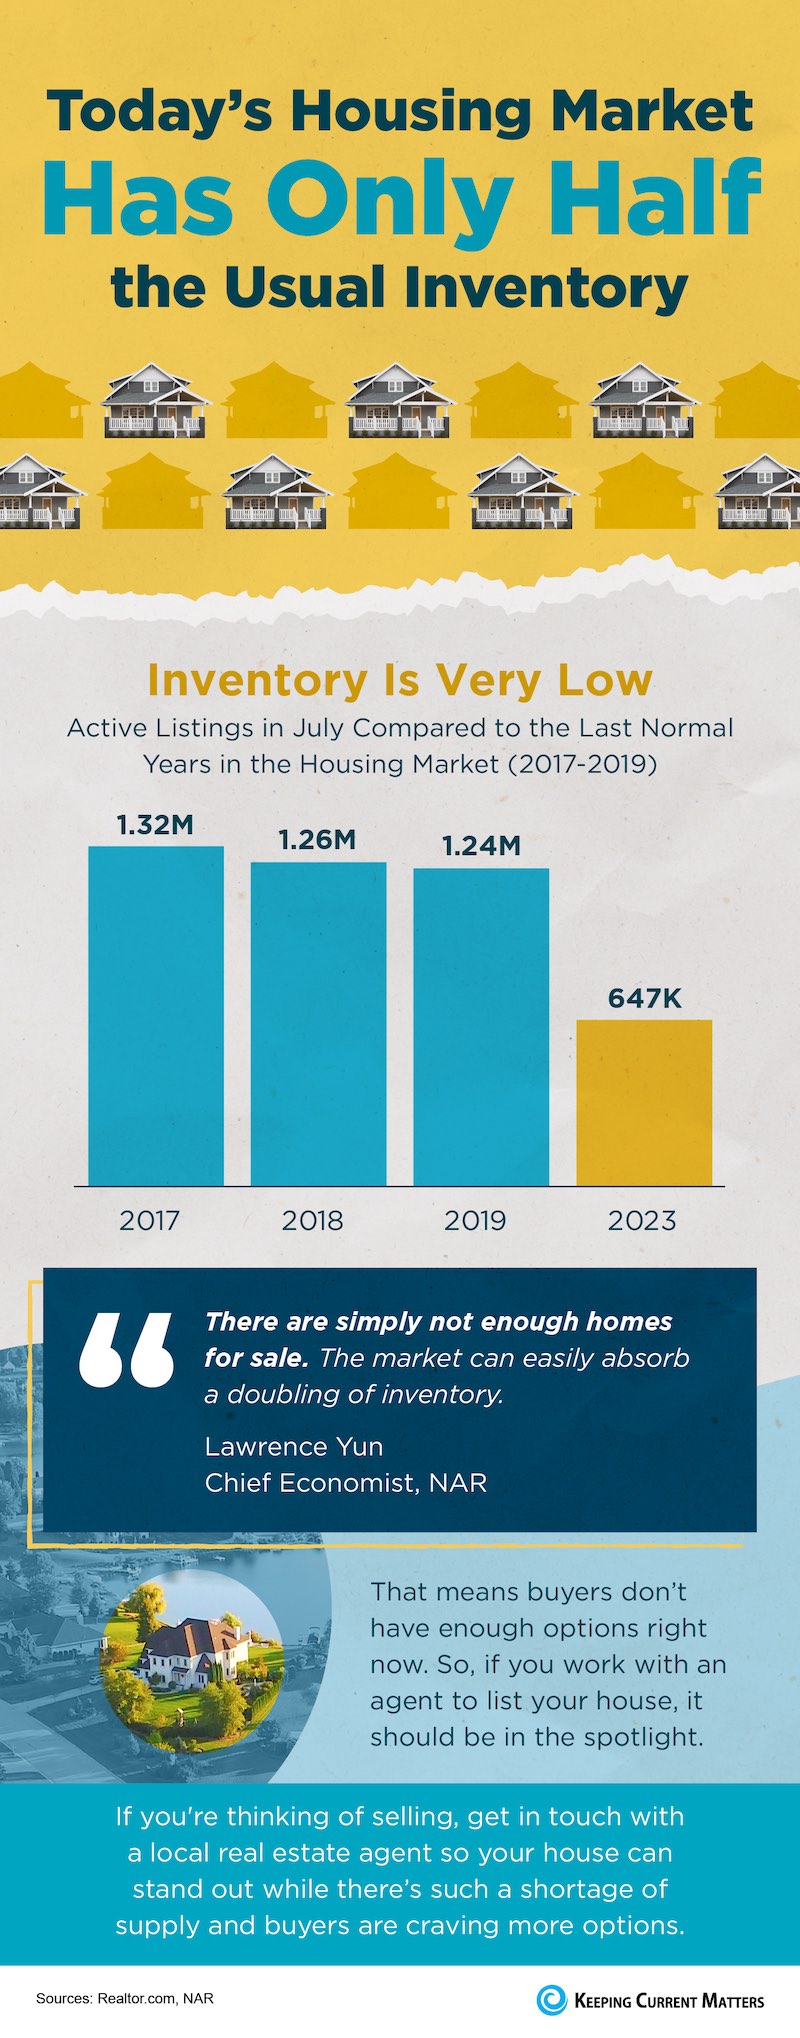 Today’s Housing Market Has Only Half the Usual Inventory